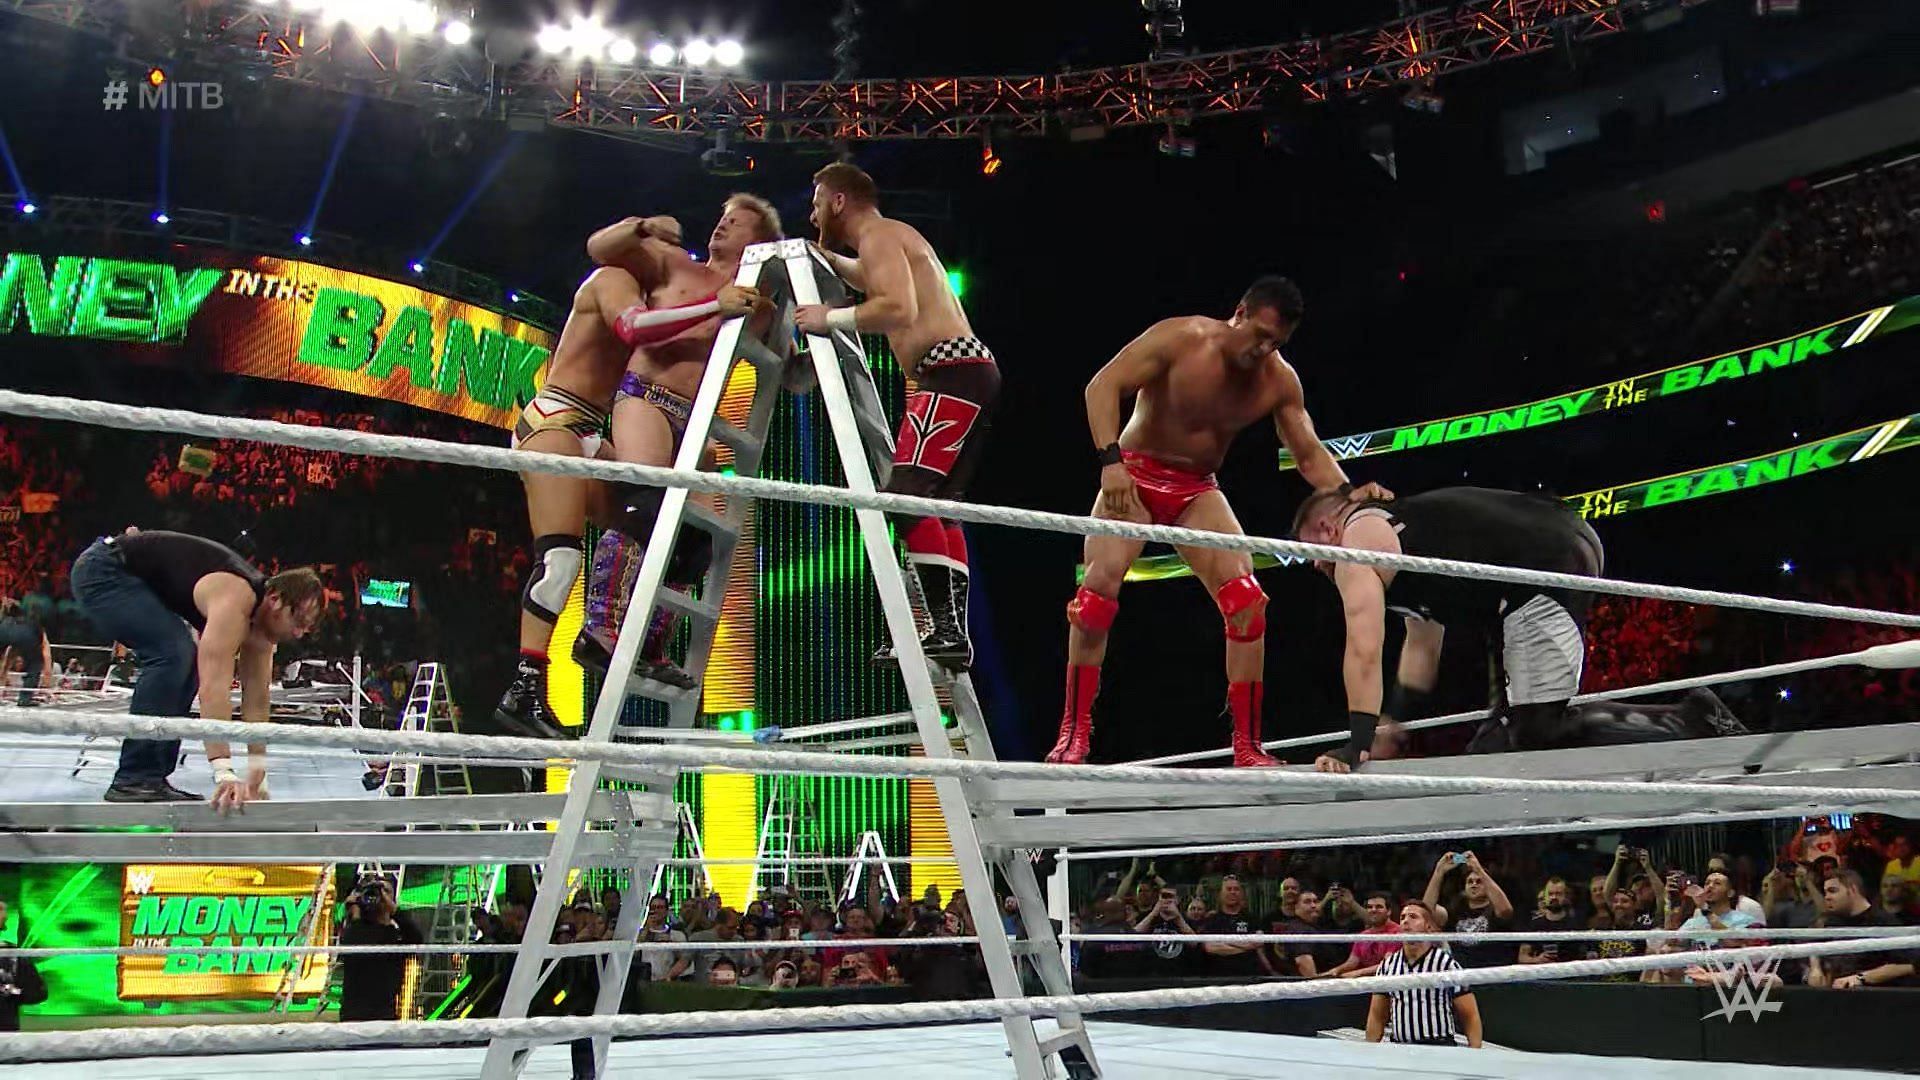 The Money in the Bank Ladder match